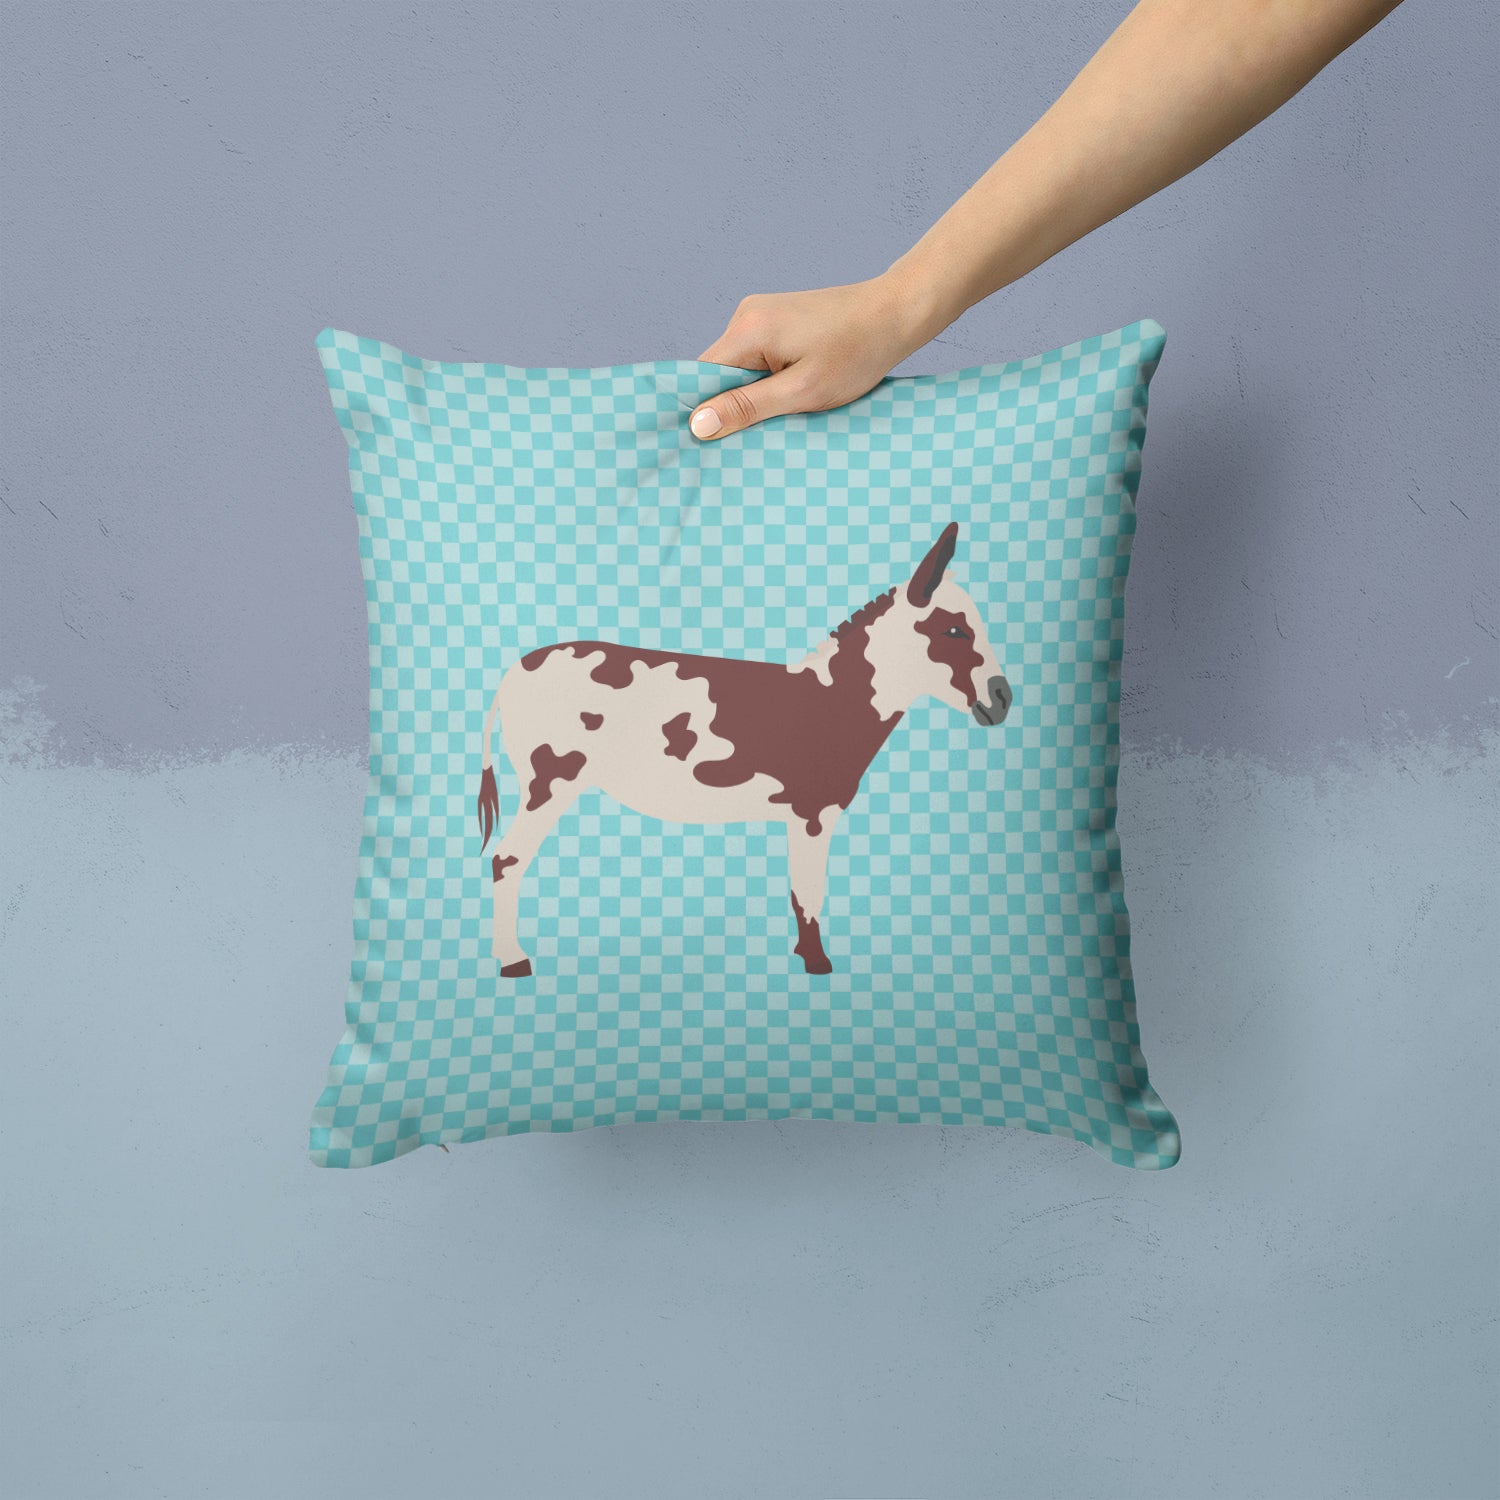 American Spotted Donkey Blue Check Fabric Decorative Pillow BB8025PW1414 - the-store.com